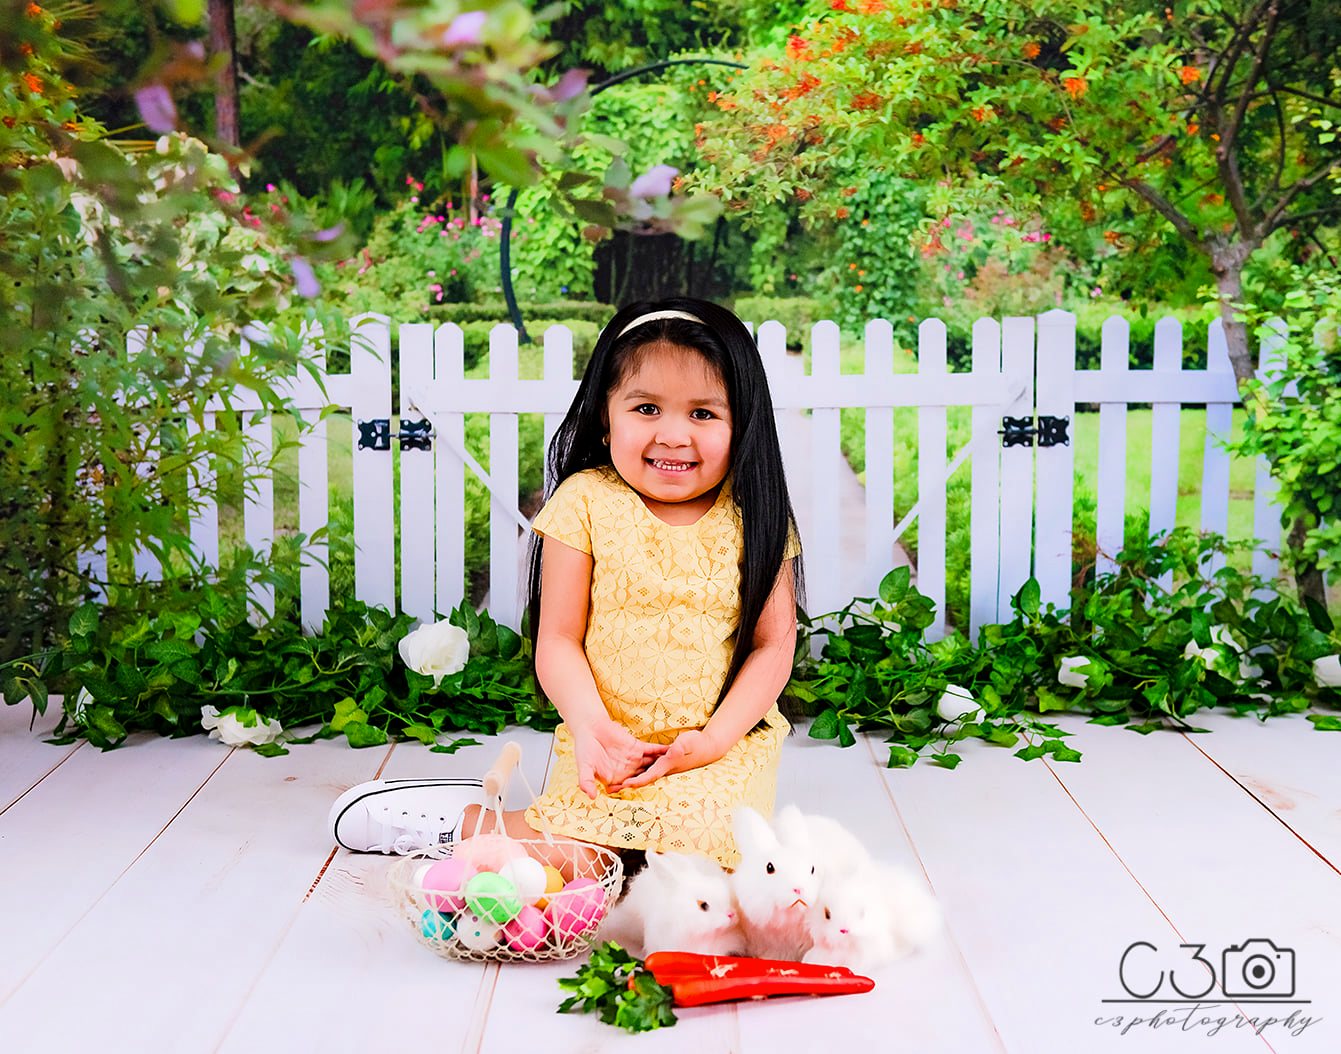 Kate Spring Garden White Fence Backdrop for Photography Designed by Tyna Renner